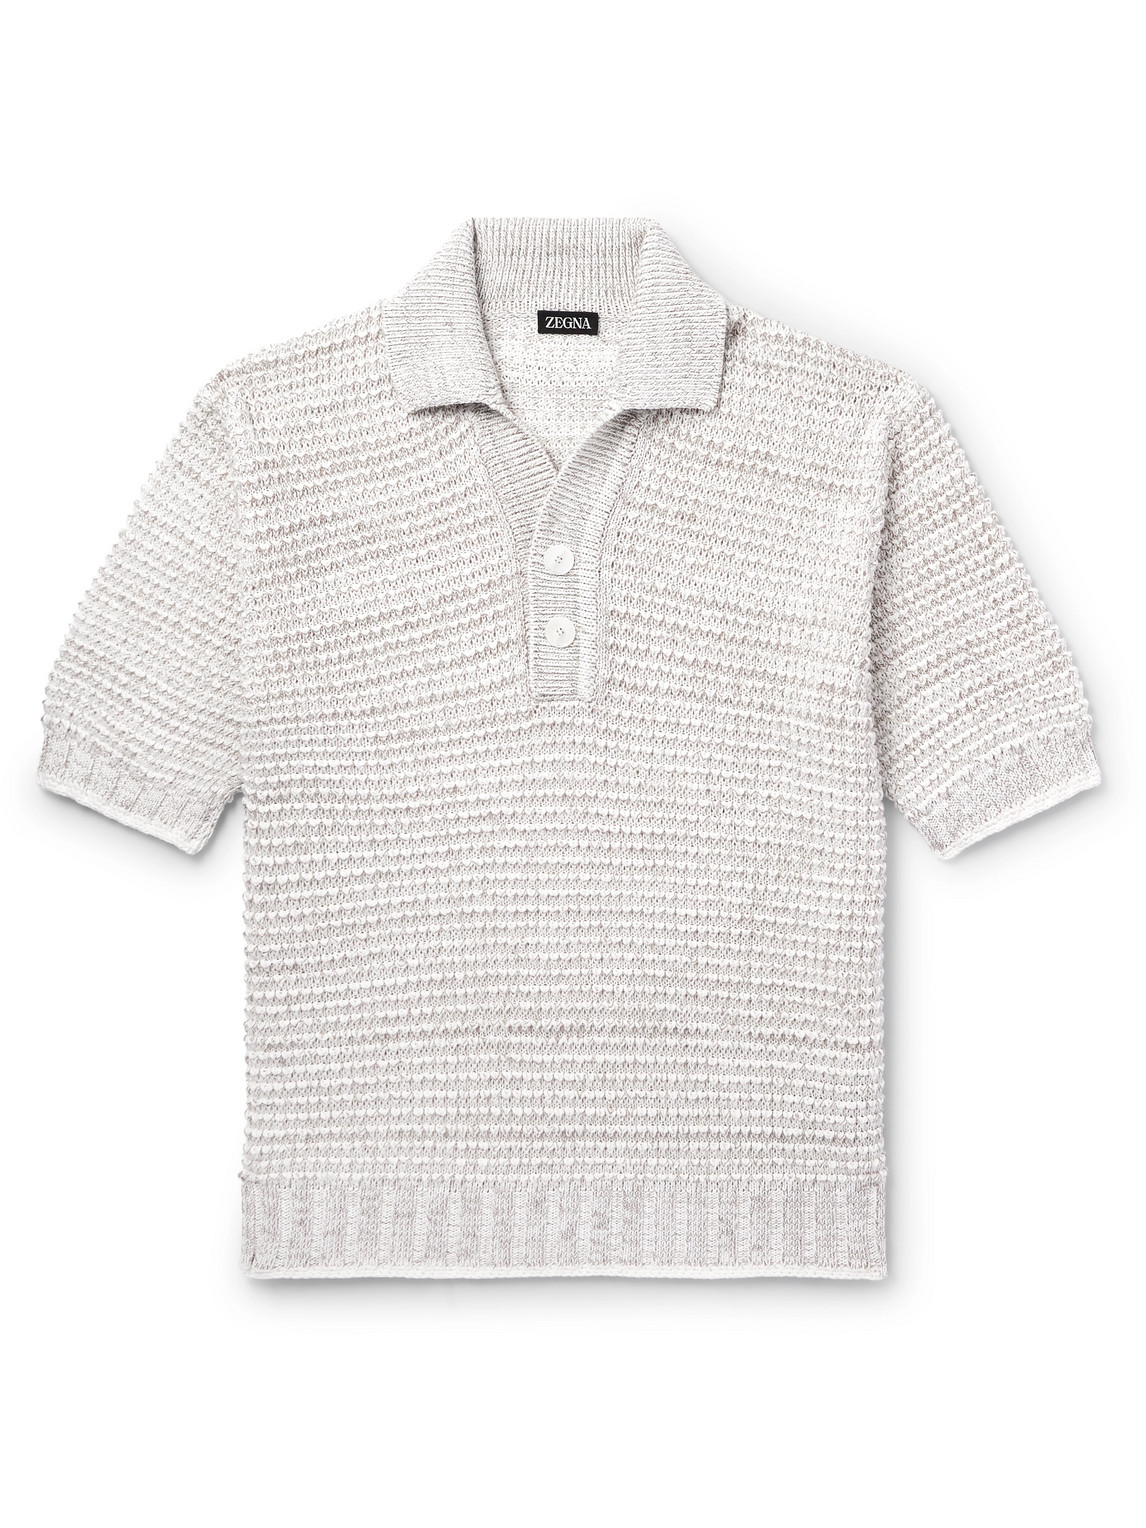 Zegna Open-knit Cotton, Linen, Silk And Cashmere-blend Polo Shirt In Gray